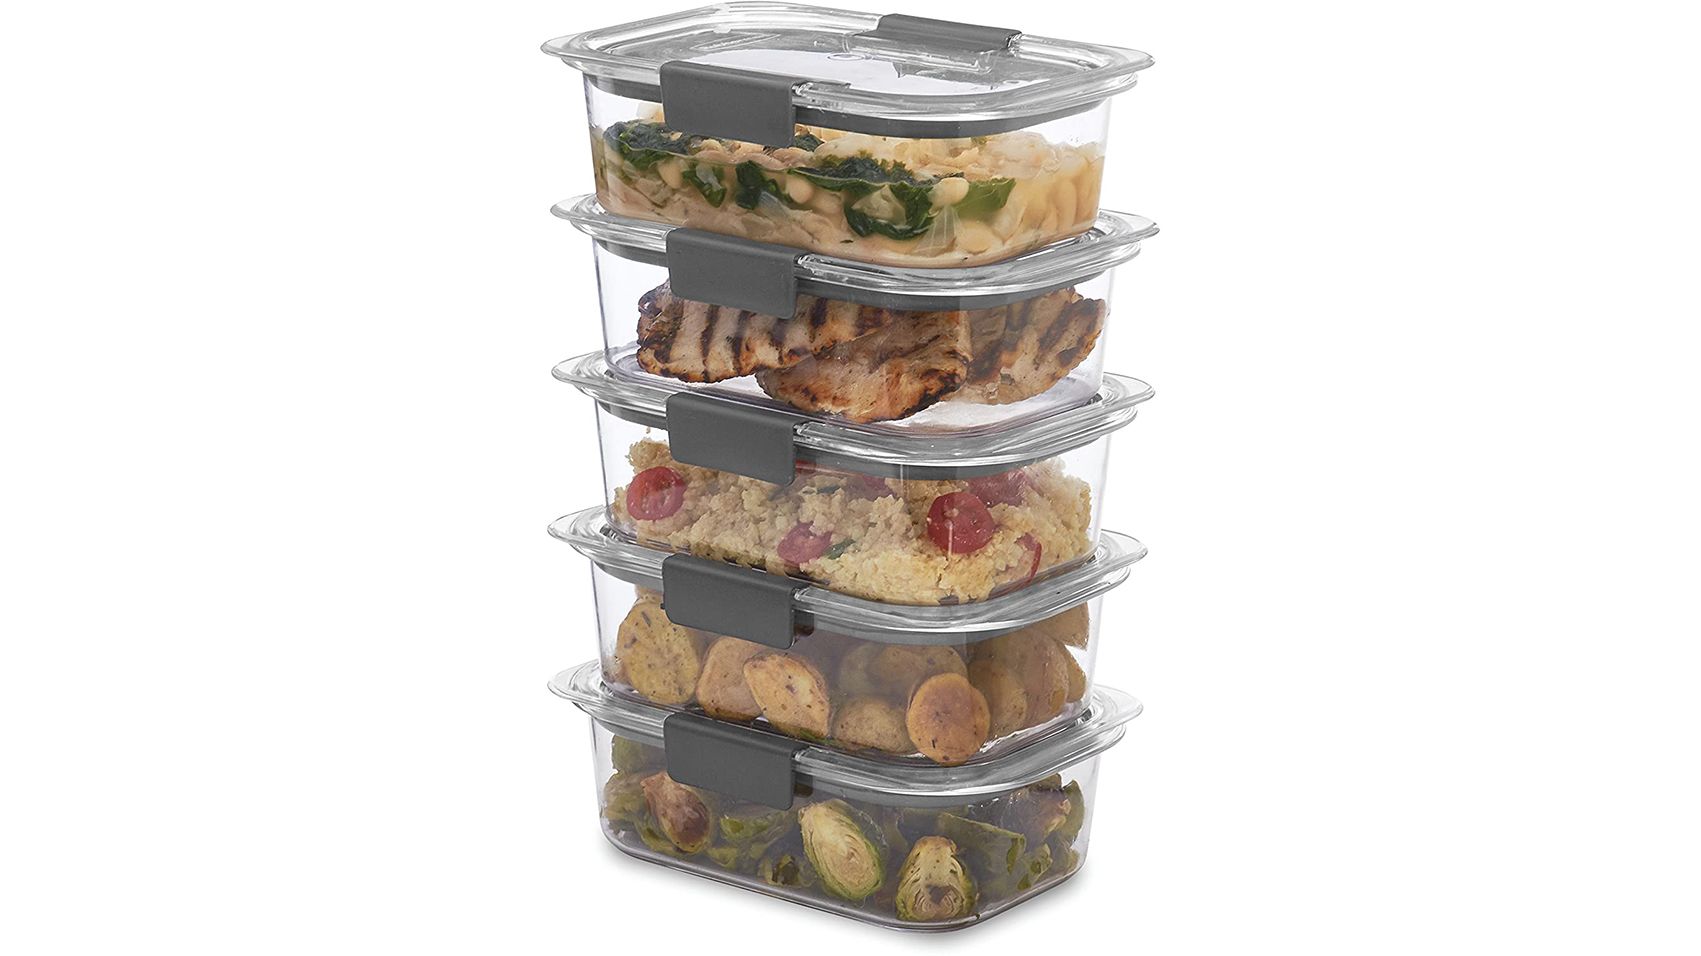 Best Sustainable Glass Storage Containers: Rubbermaid Brilliance